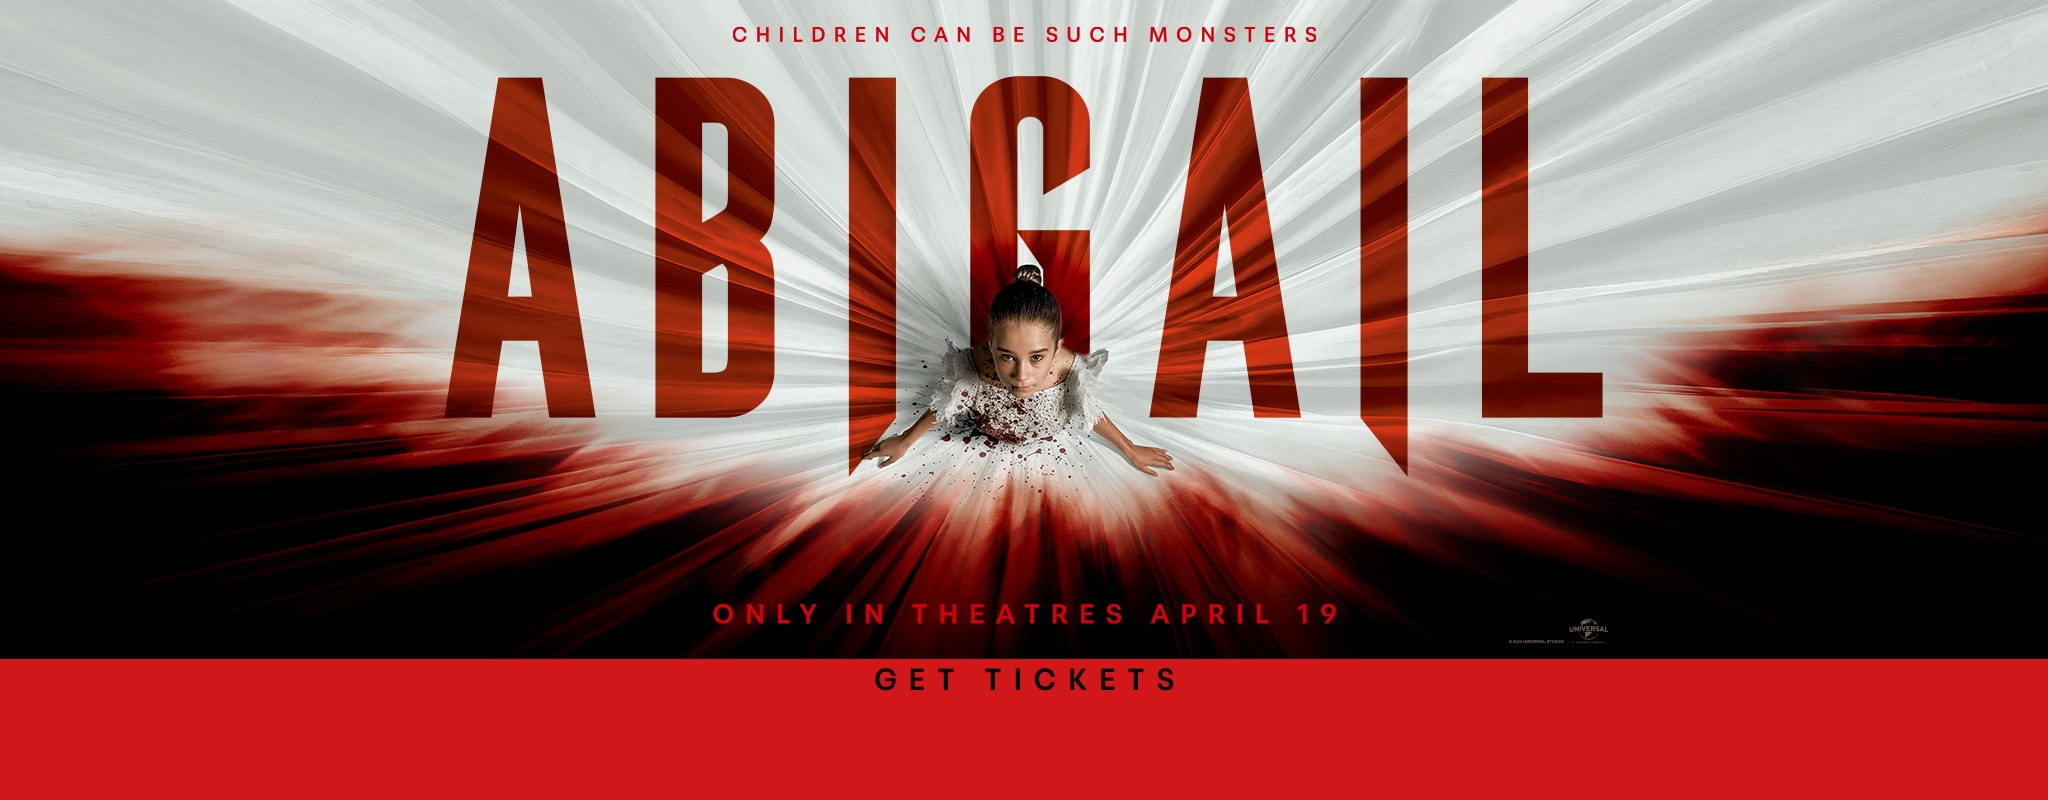 Abigail, only in theatres April 19. Get tickets